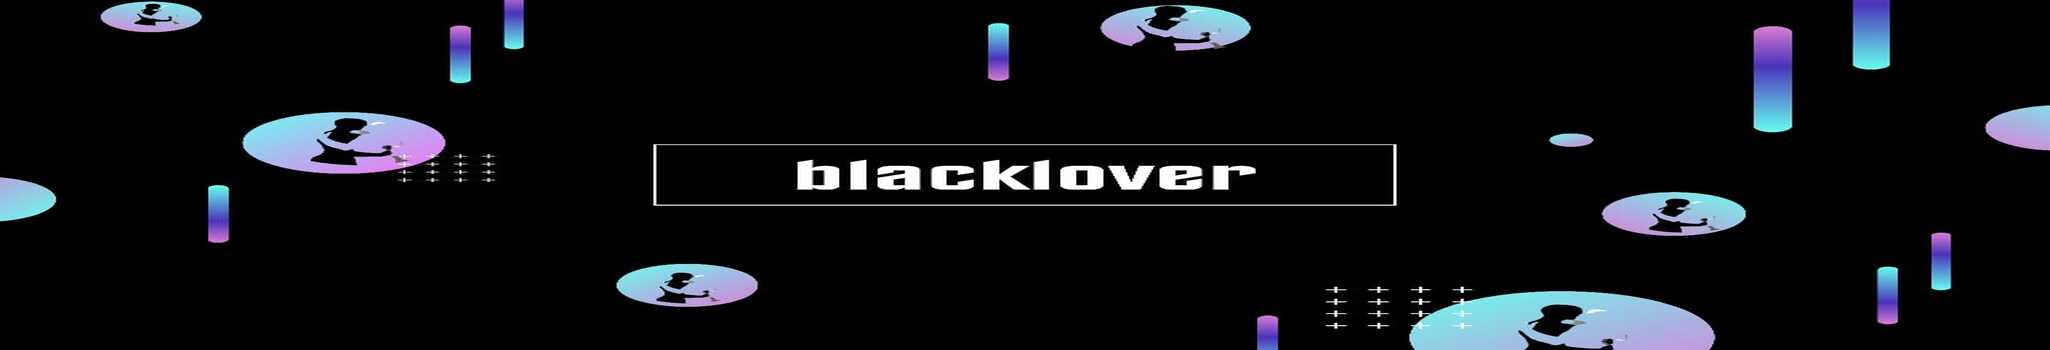 Blacklover Poetry